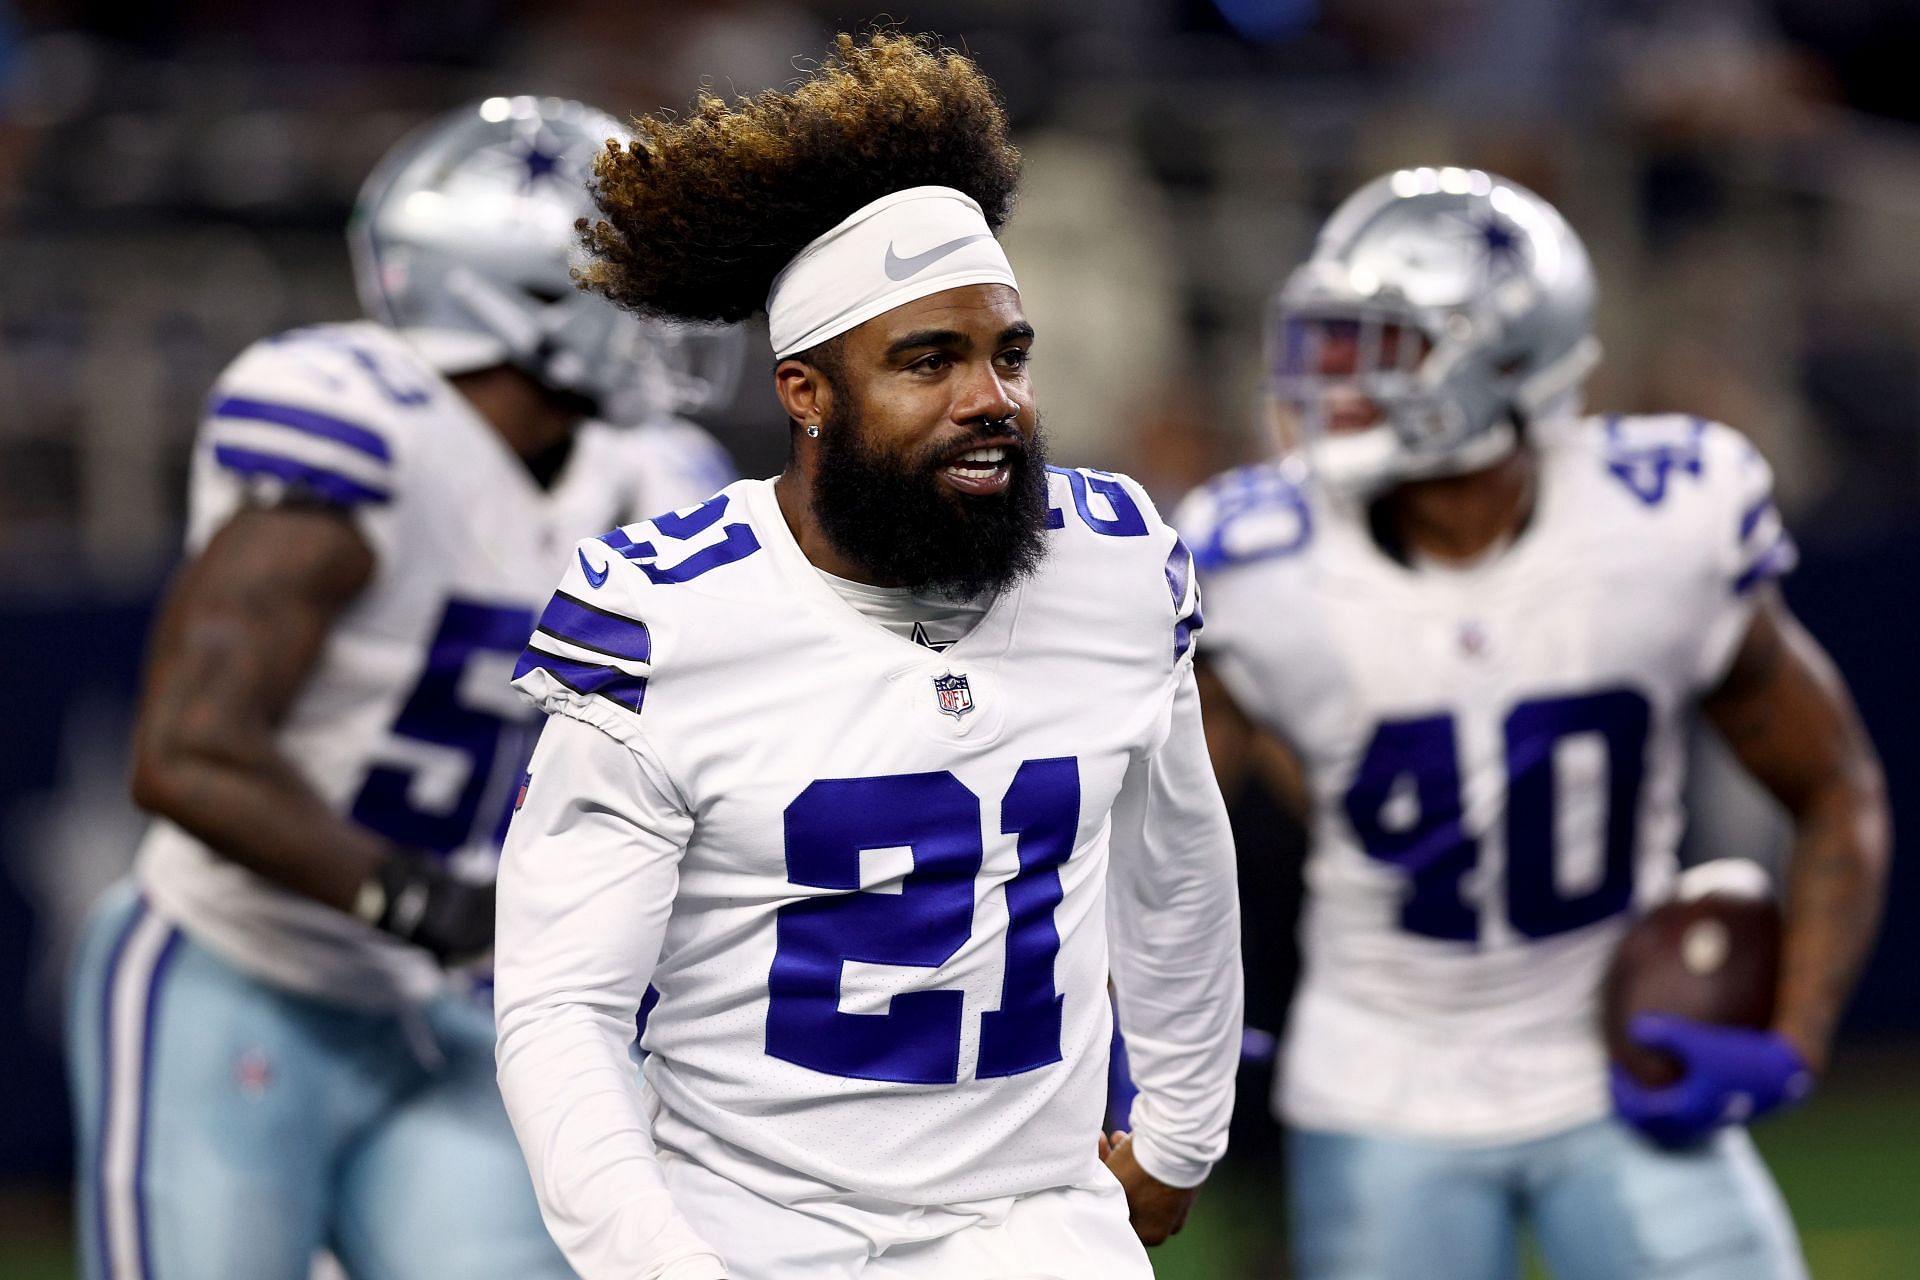 Ezekiel Elliott was one of the first casualties of the running back debacle